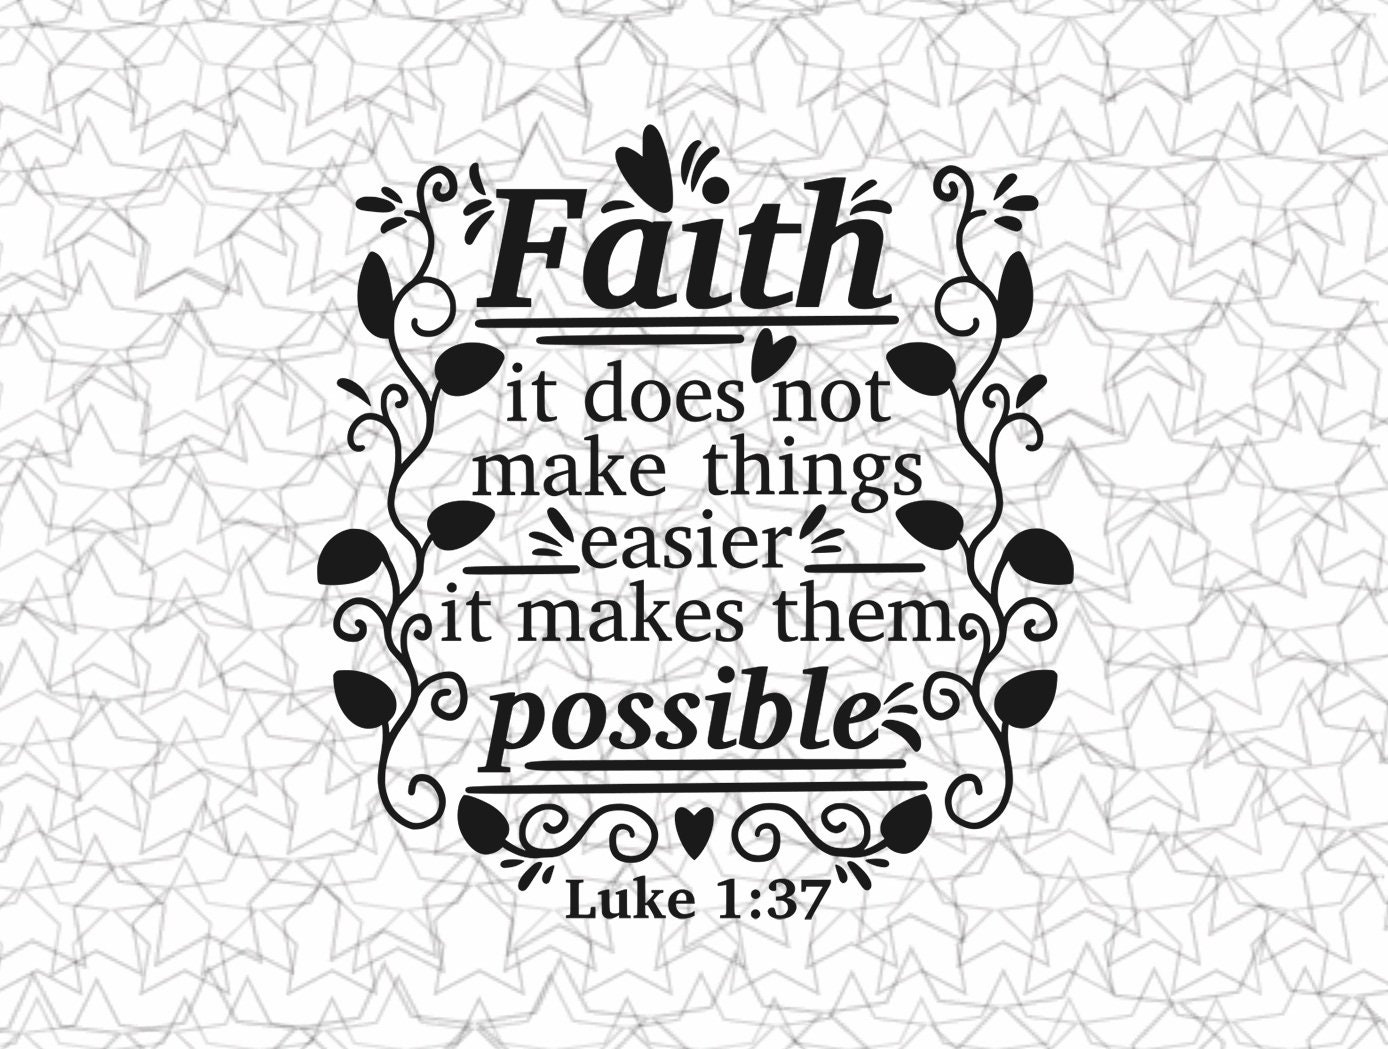 Faith Does Not Make Things Easy Luke 1 37 Leopard Leather Style NNRZ21 -  Godly Bible